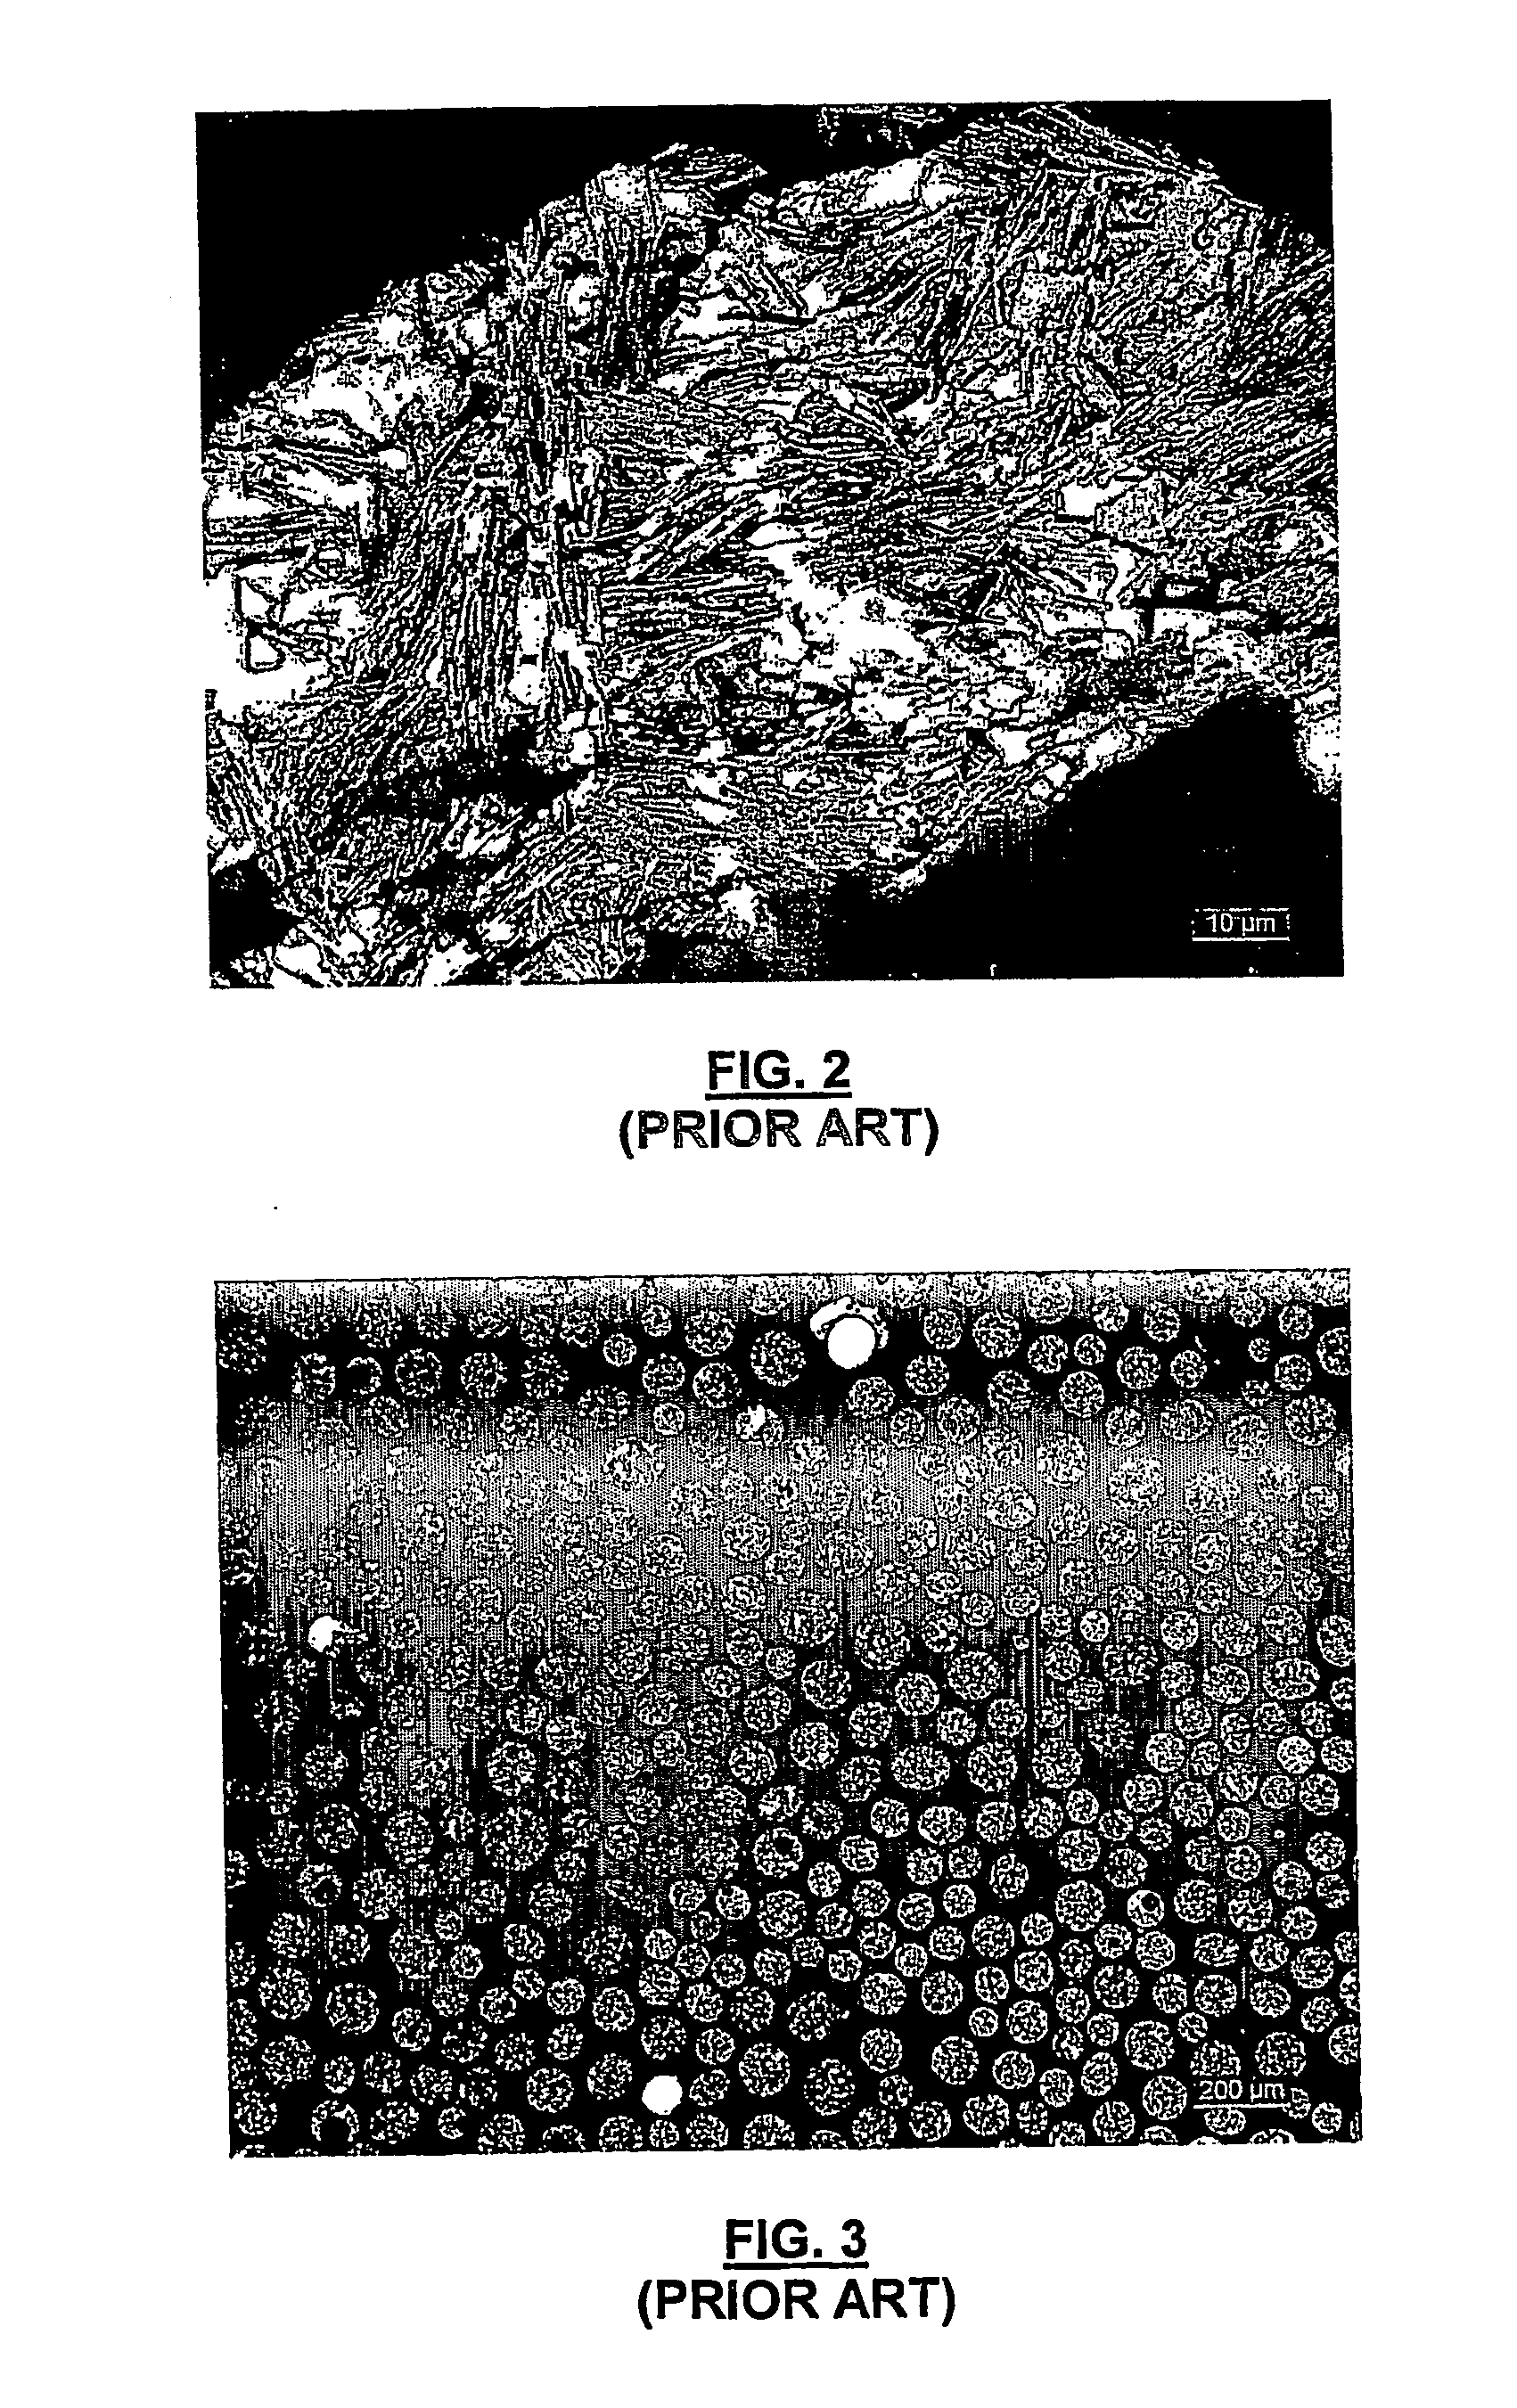 Method for treating tungsten carbide particles